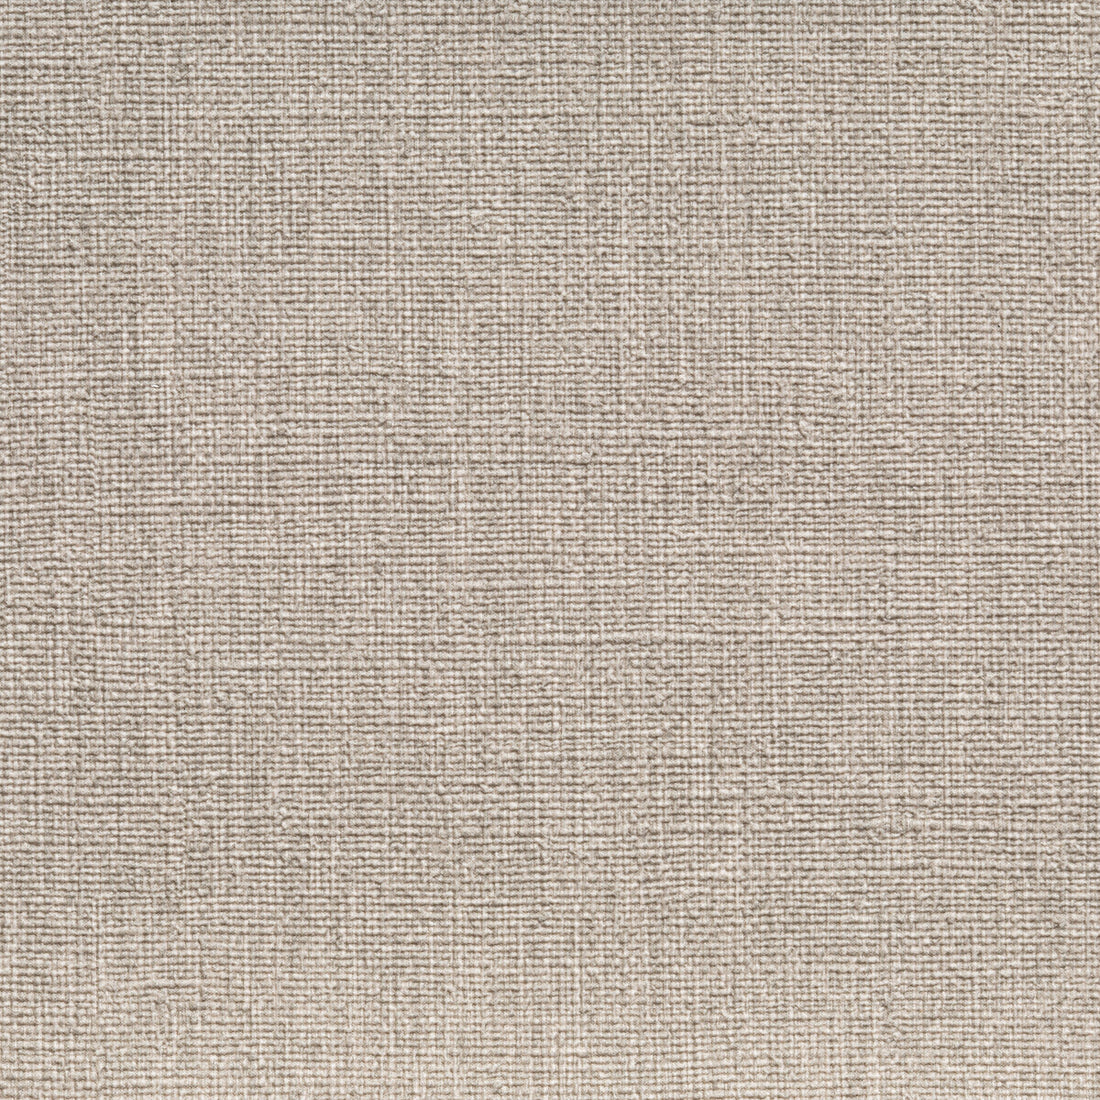 Caslin fabric in sandstone color - pattern CASLIN.11.0 - by Kravet Contract in the Foundations / Value collection